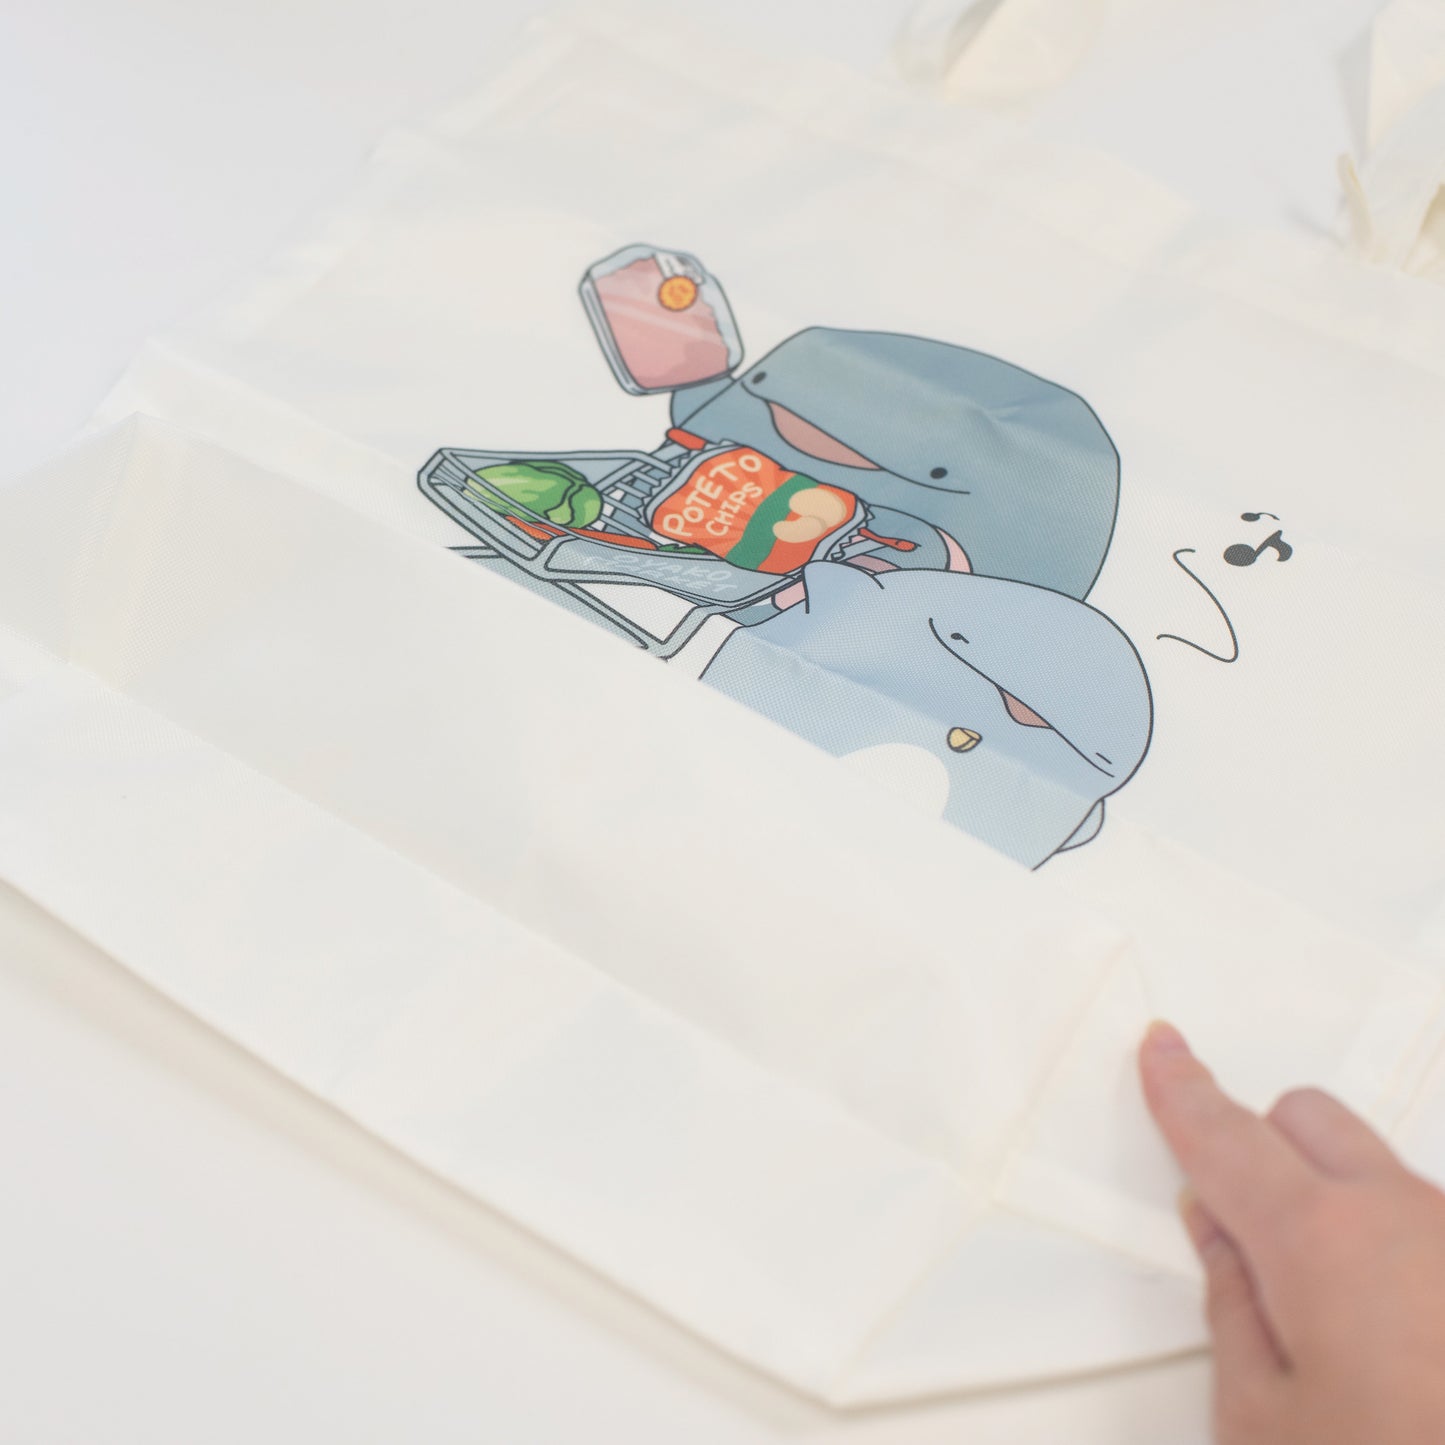 [Parent and child dolphin] Eco bag (with storage pouch)